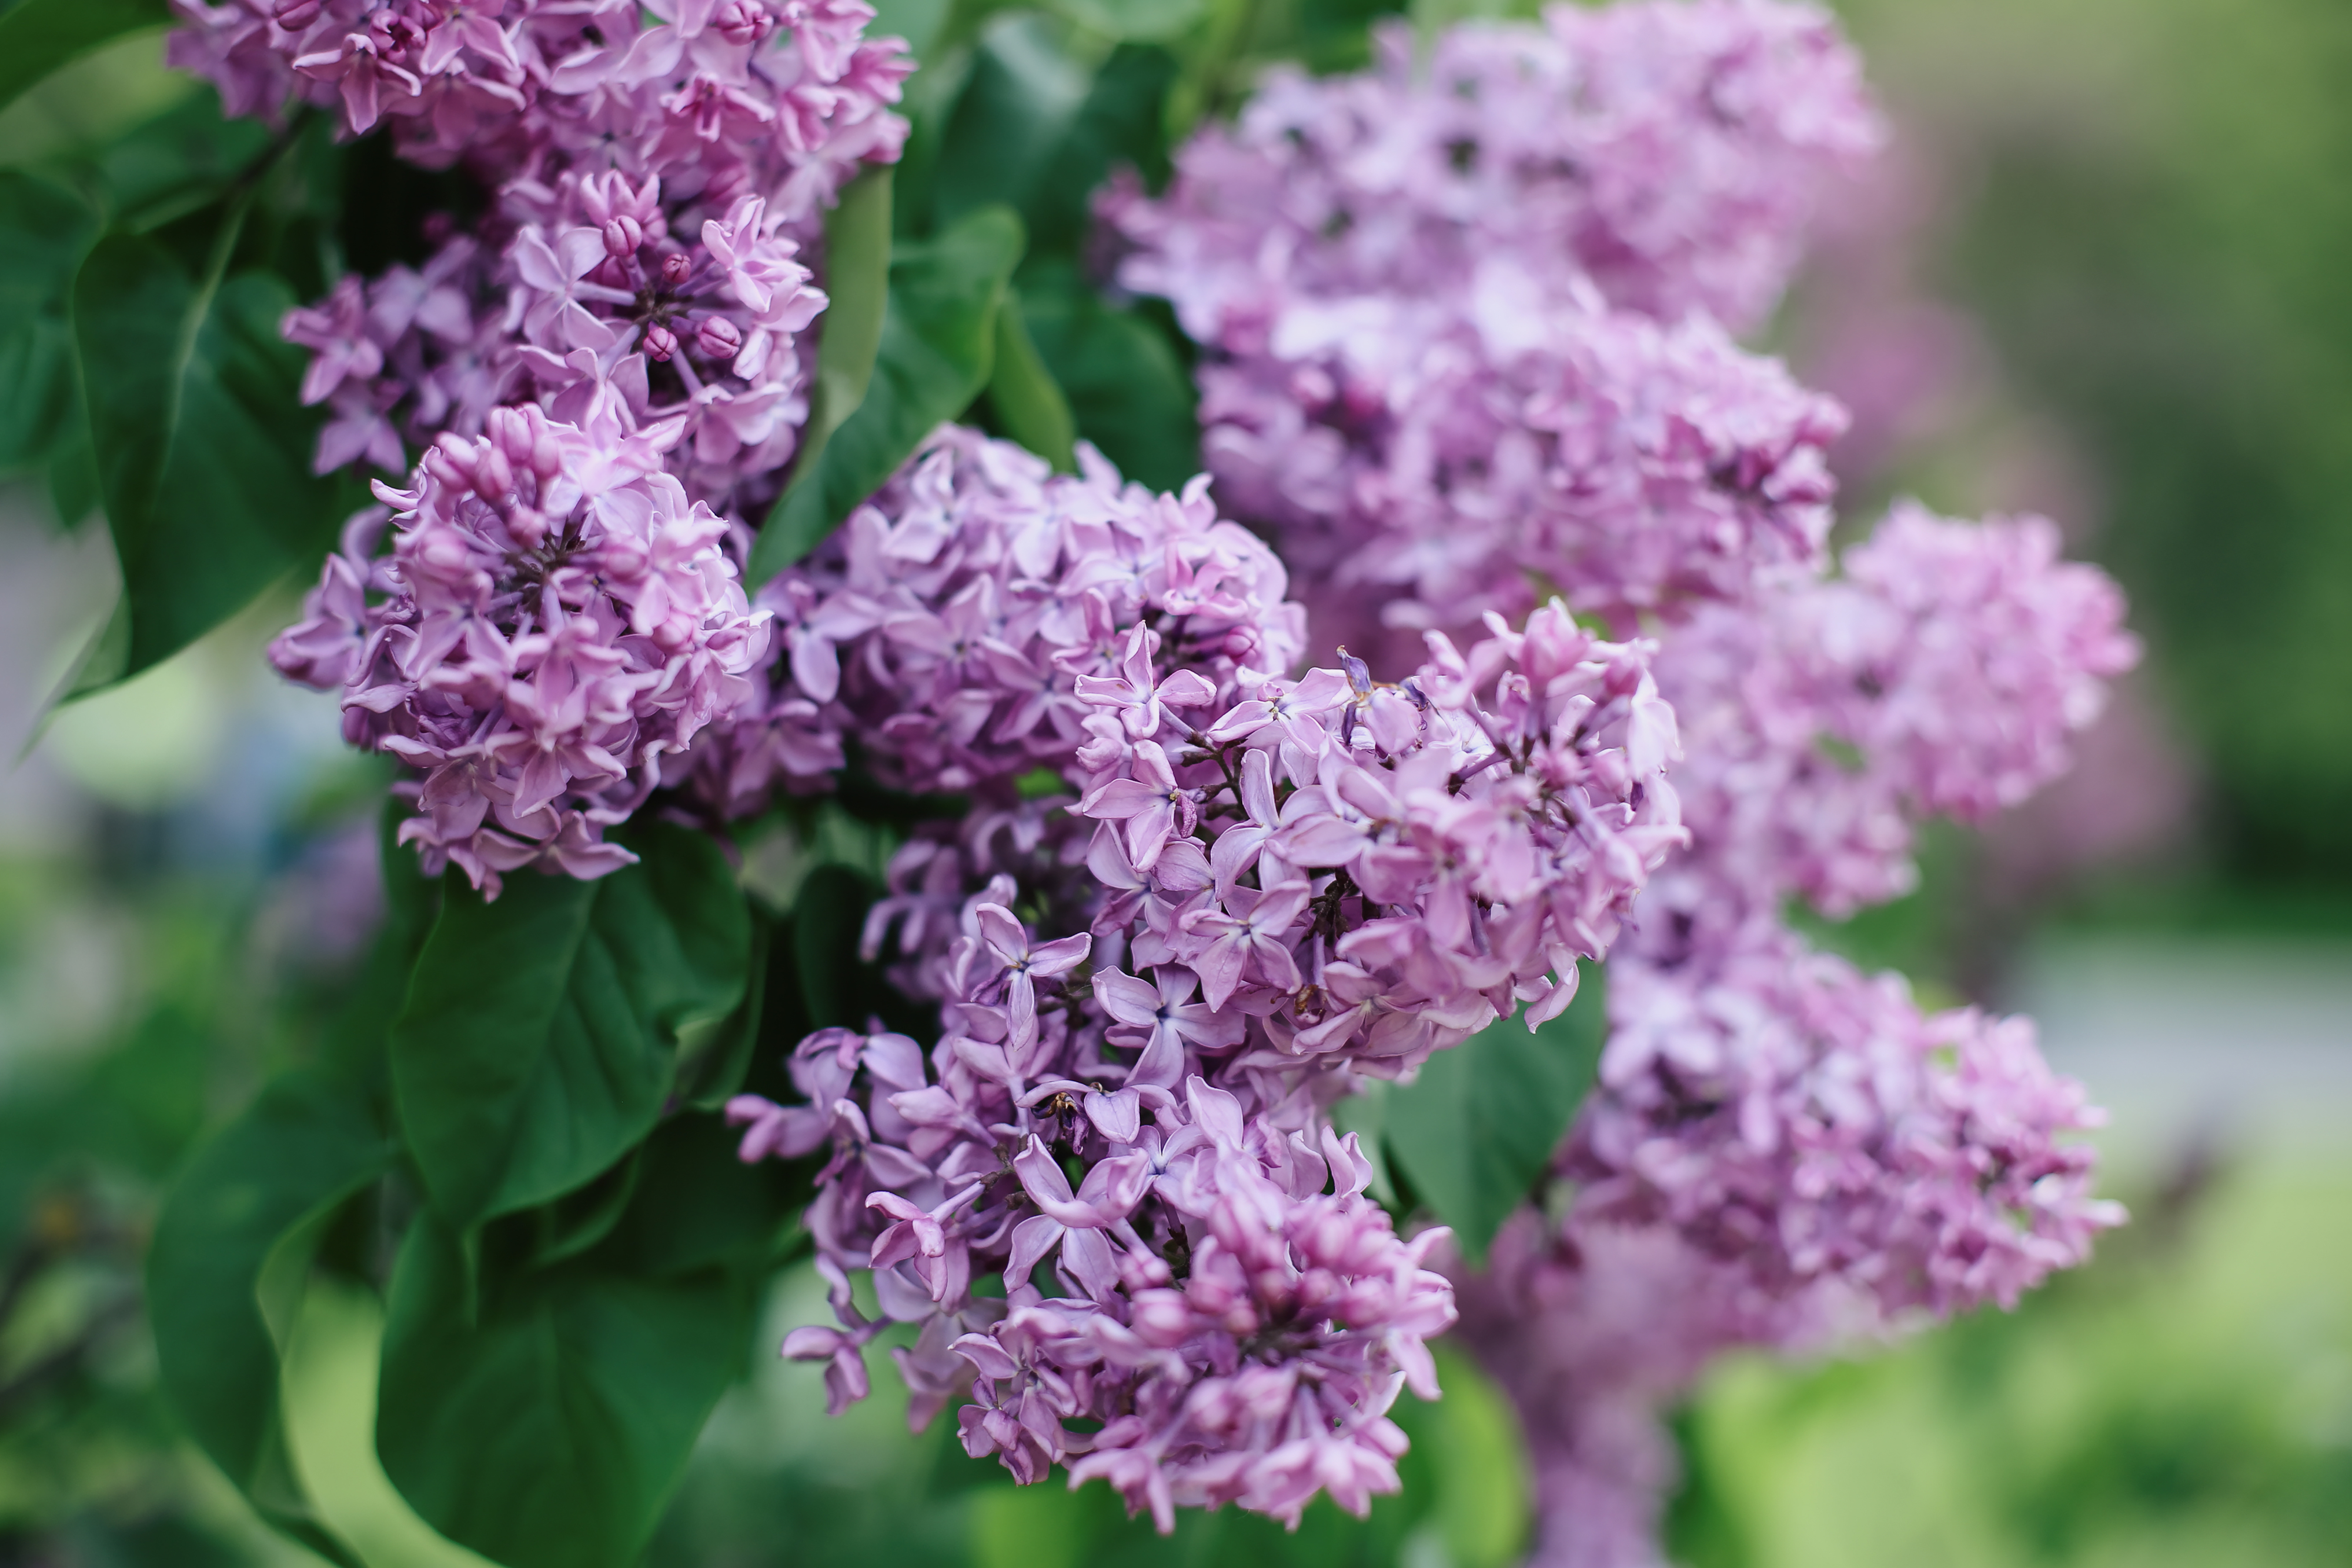 Lilac flowers in full bloom on their green leafy branches